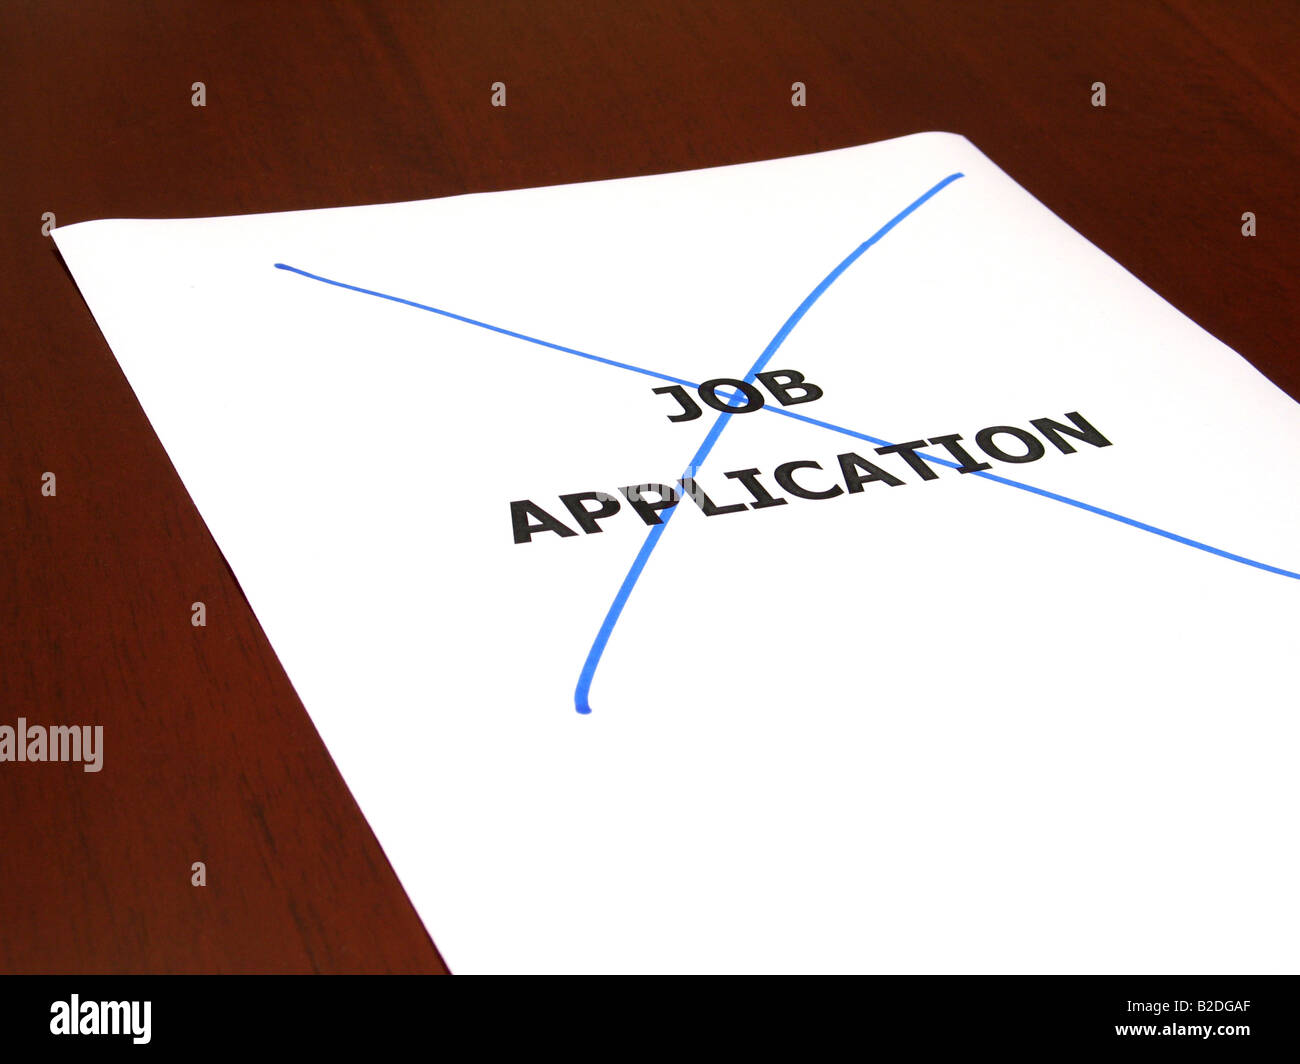 Rejected job application concept Stock Photo